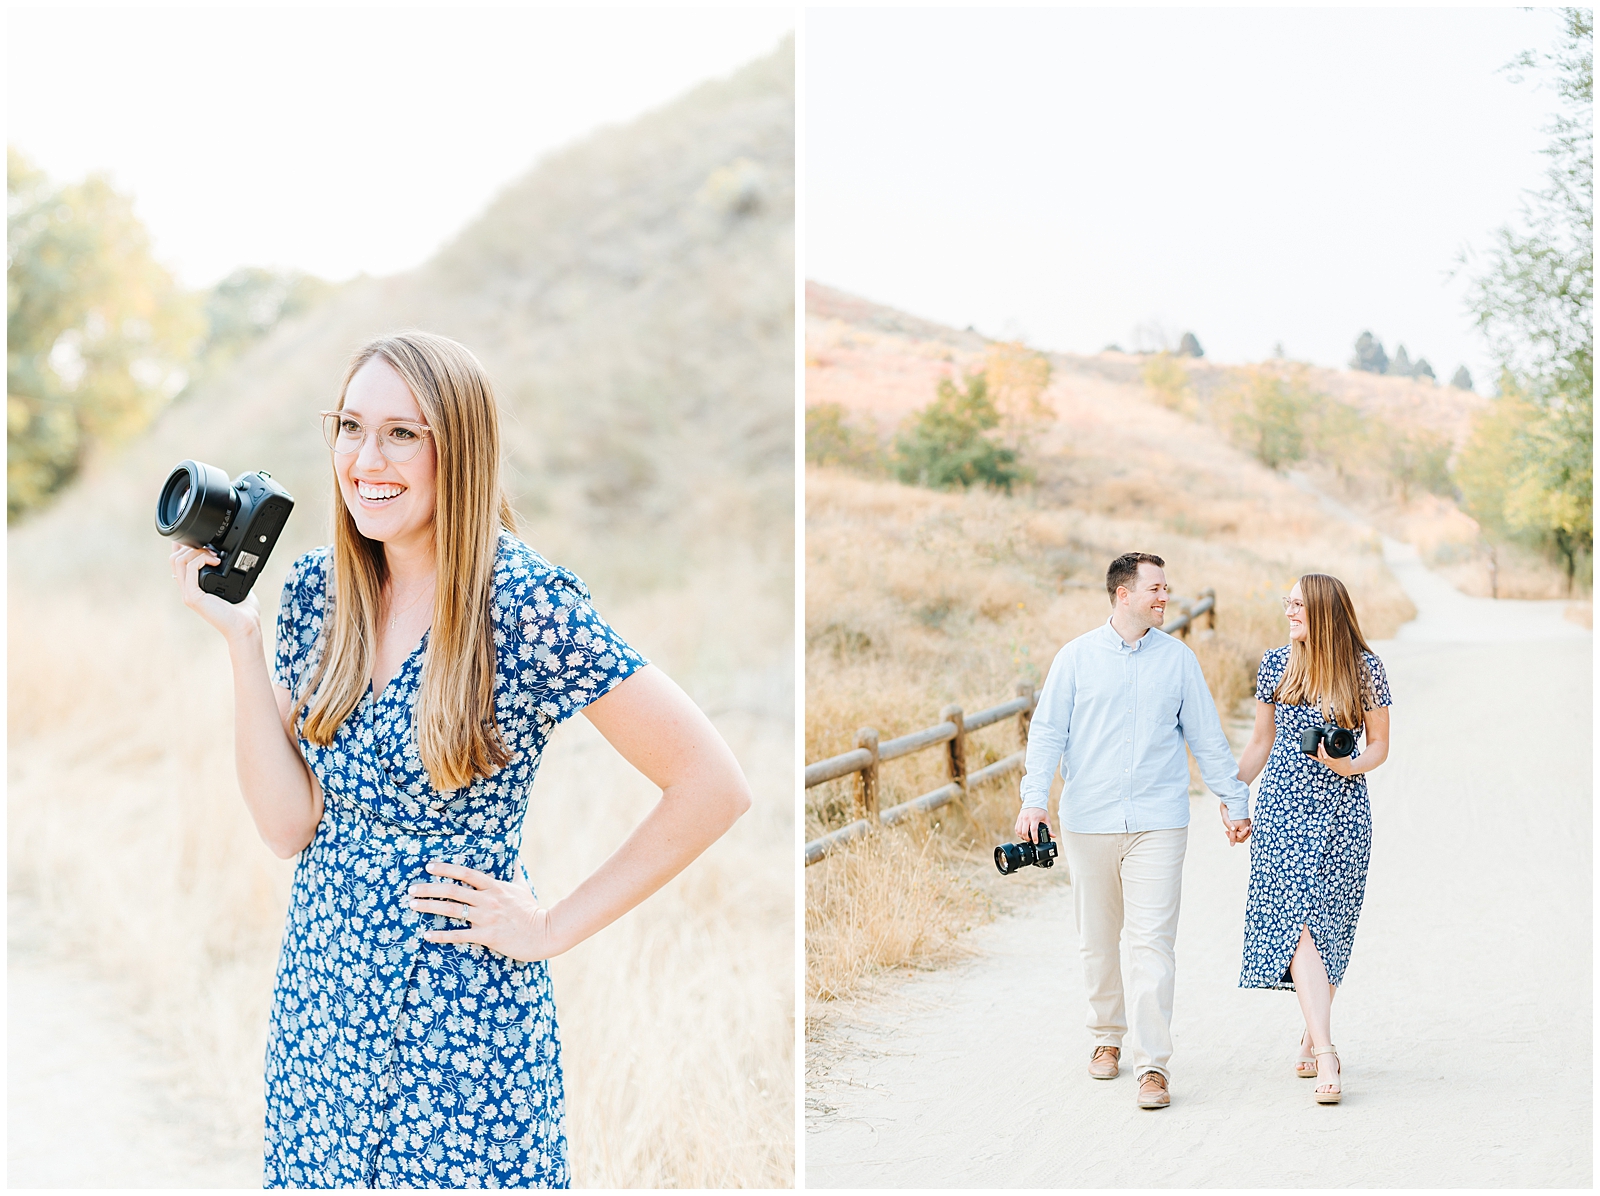 Photography Team Branding Session in the Boise Foothills